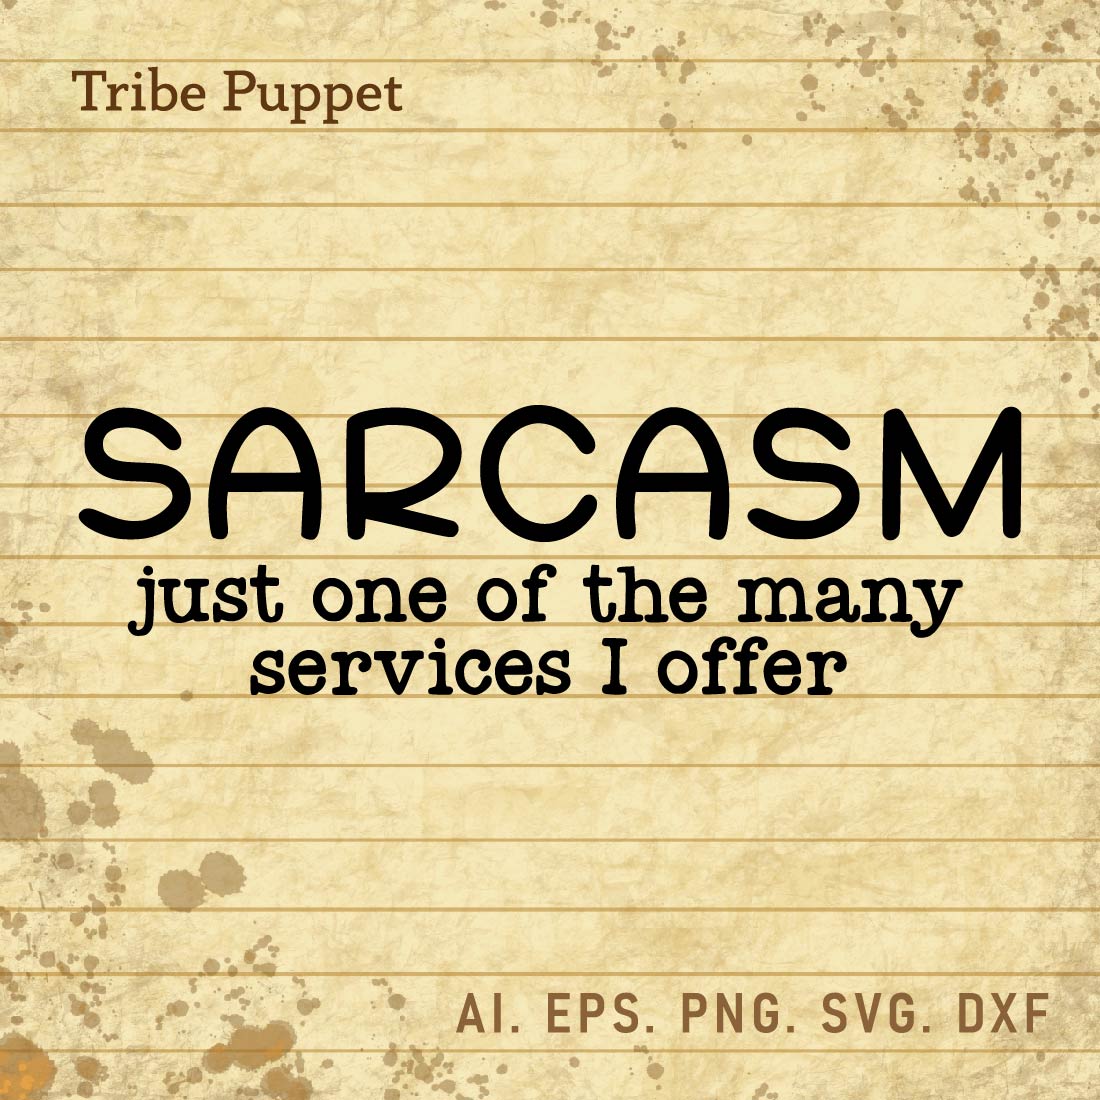 Sarcastic Quotes cover image.